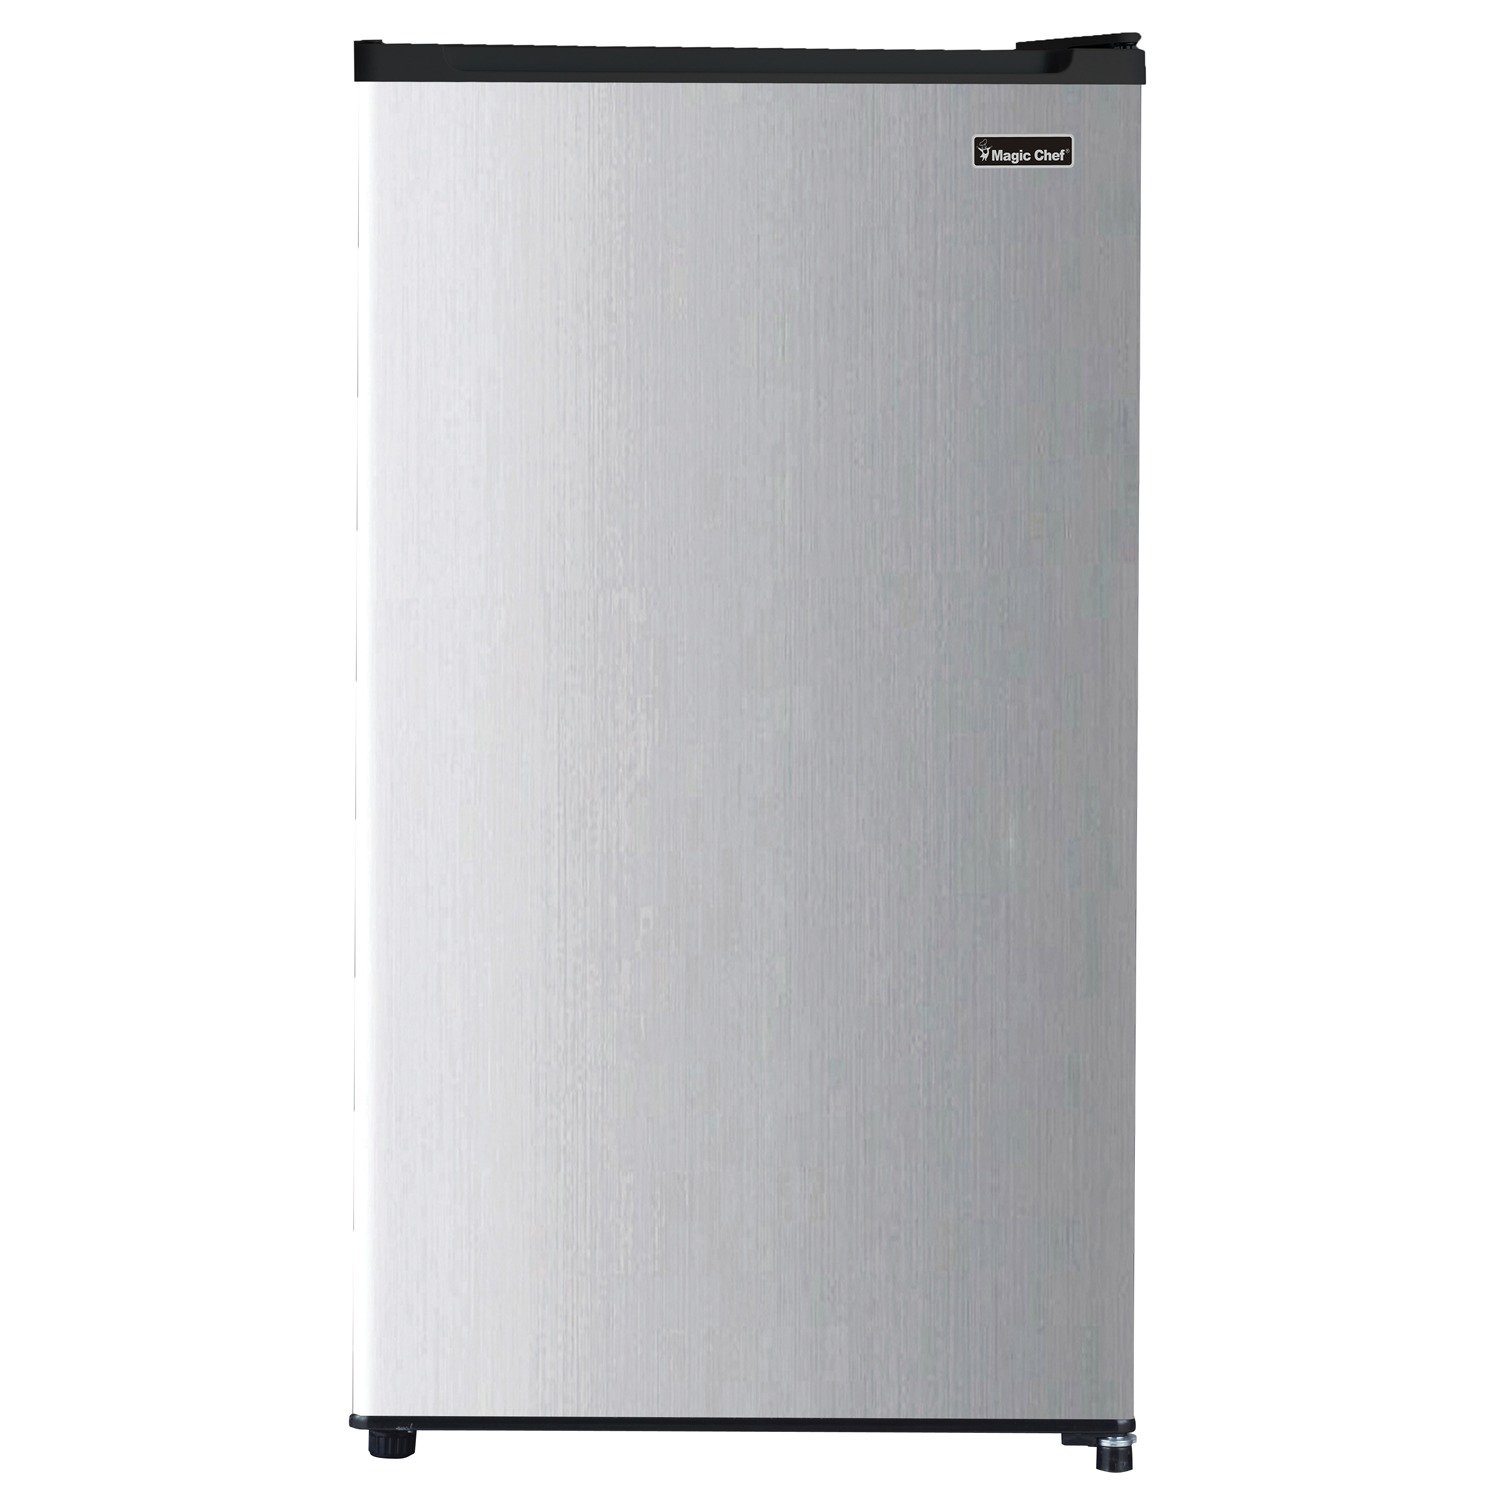 MAGIC CHEF MCAR320PSE 3.2 Cubic-Ft Compact Refrigerator (Silver)